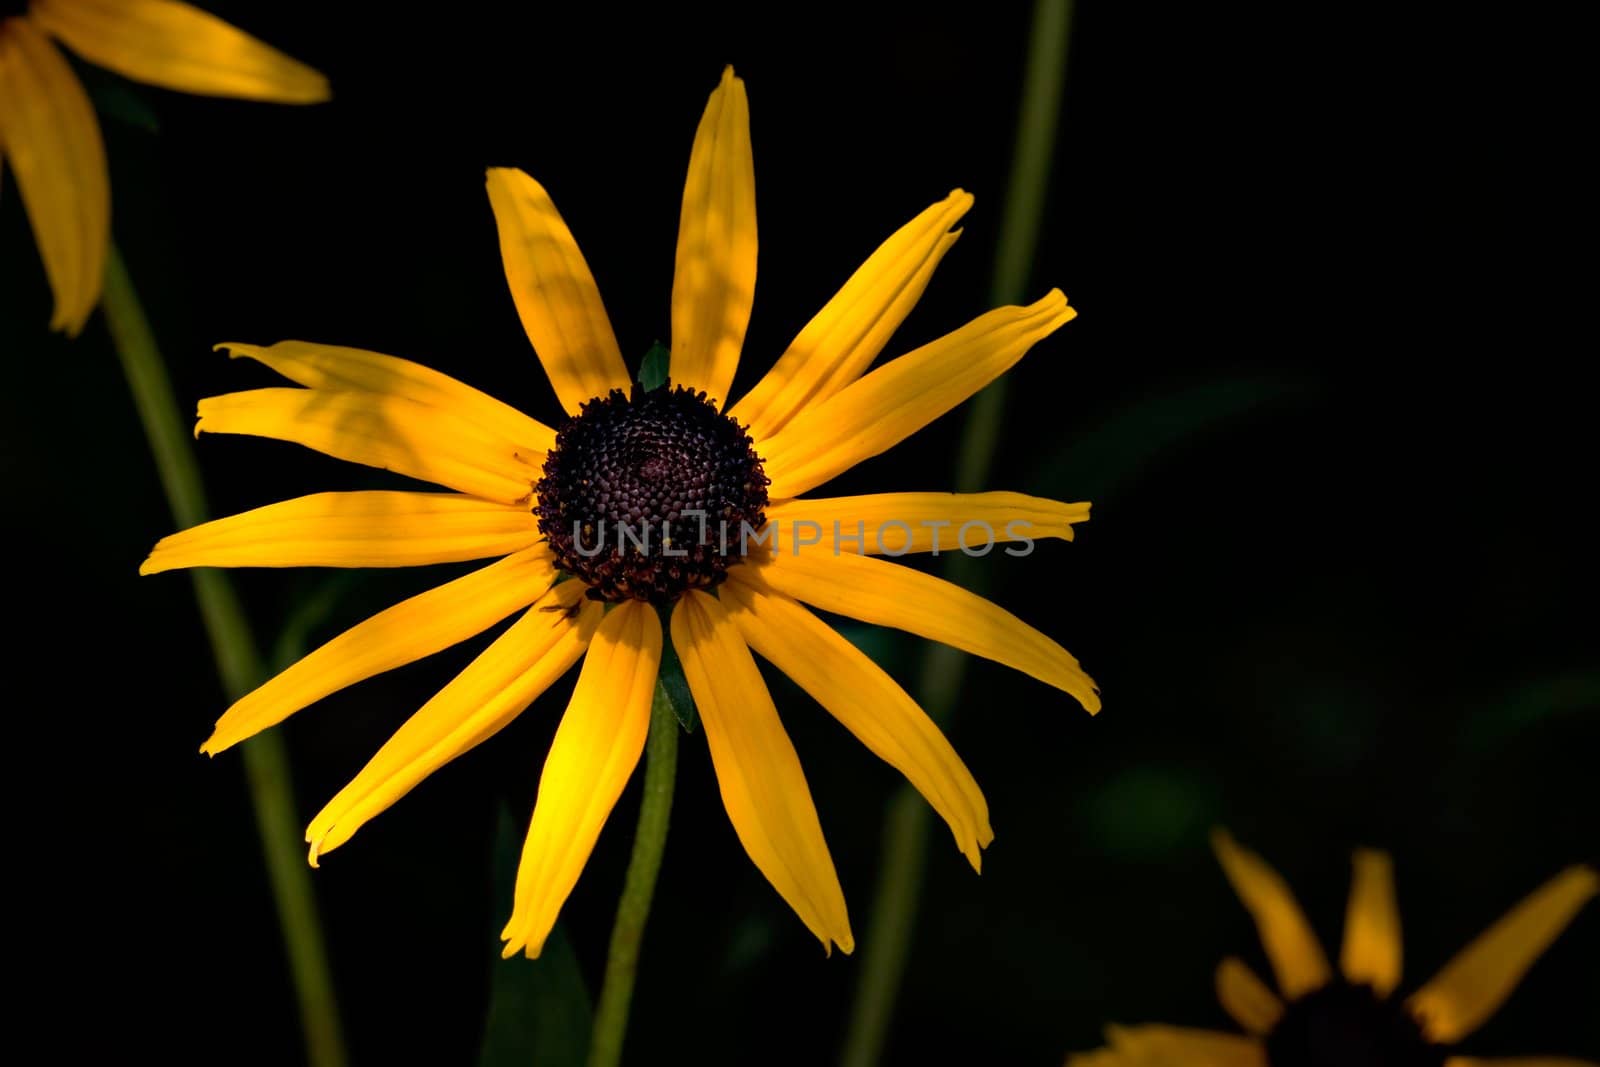 A yellow daisy growing outdoors. The daisy is naturally dramatically lit with a dark background.